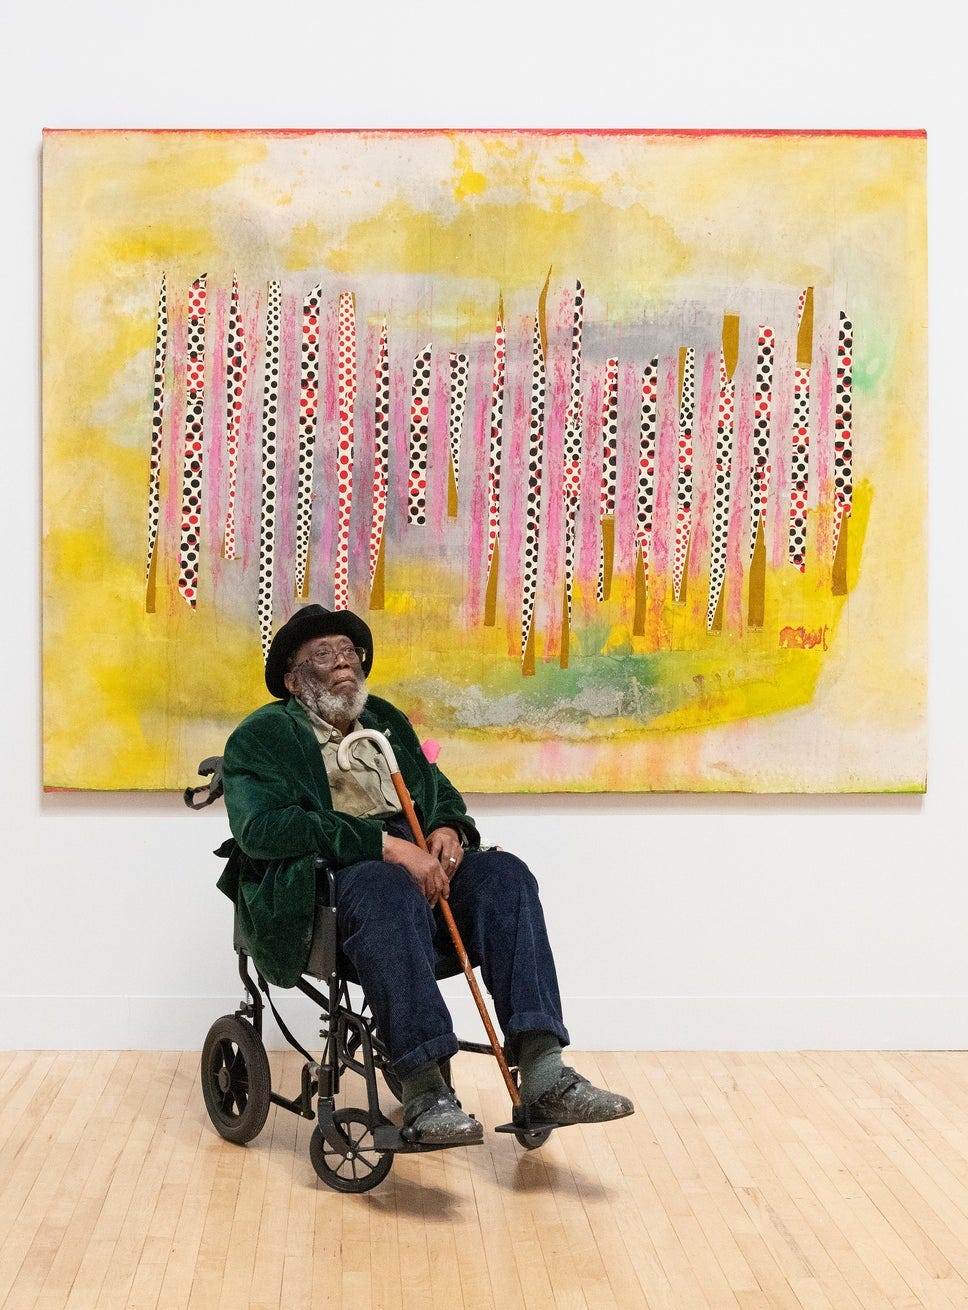 Previously unseen Frank Bowling painting unveiled ahead of Tate Britain's  retrospective on the artist | London Evening Standard | Evening Standard